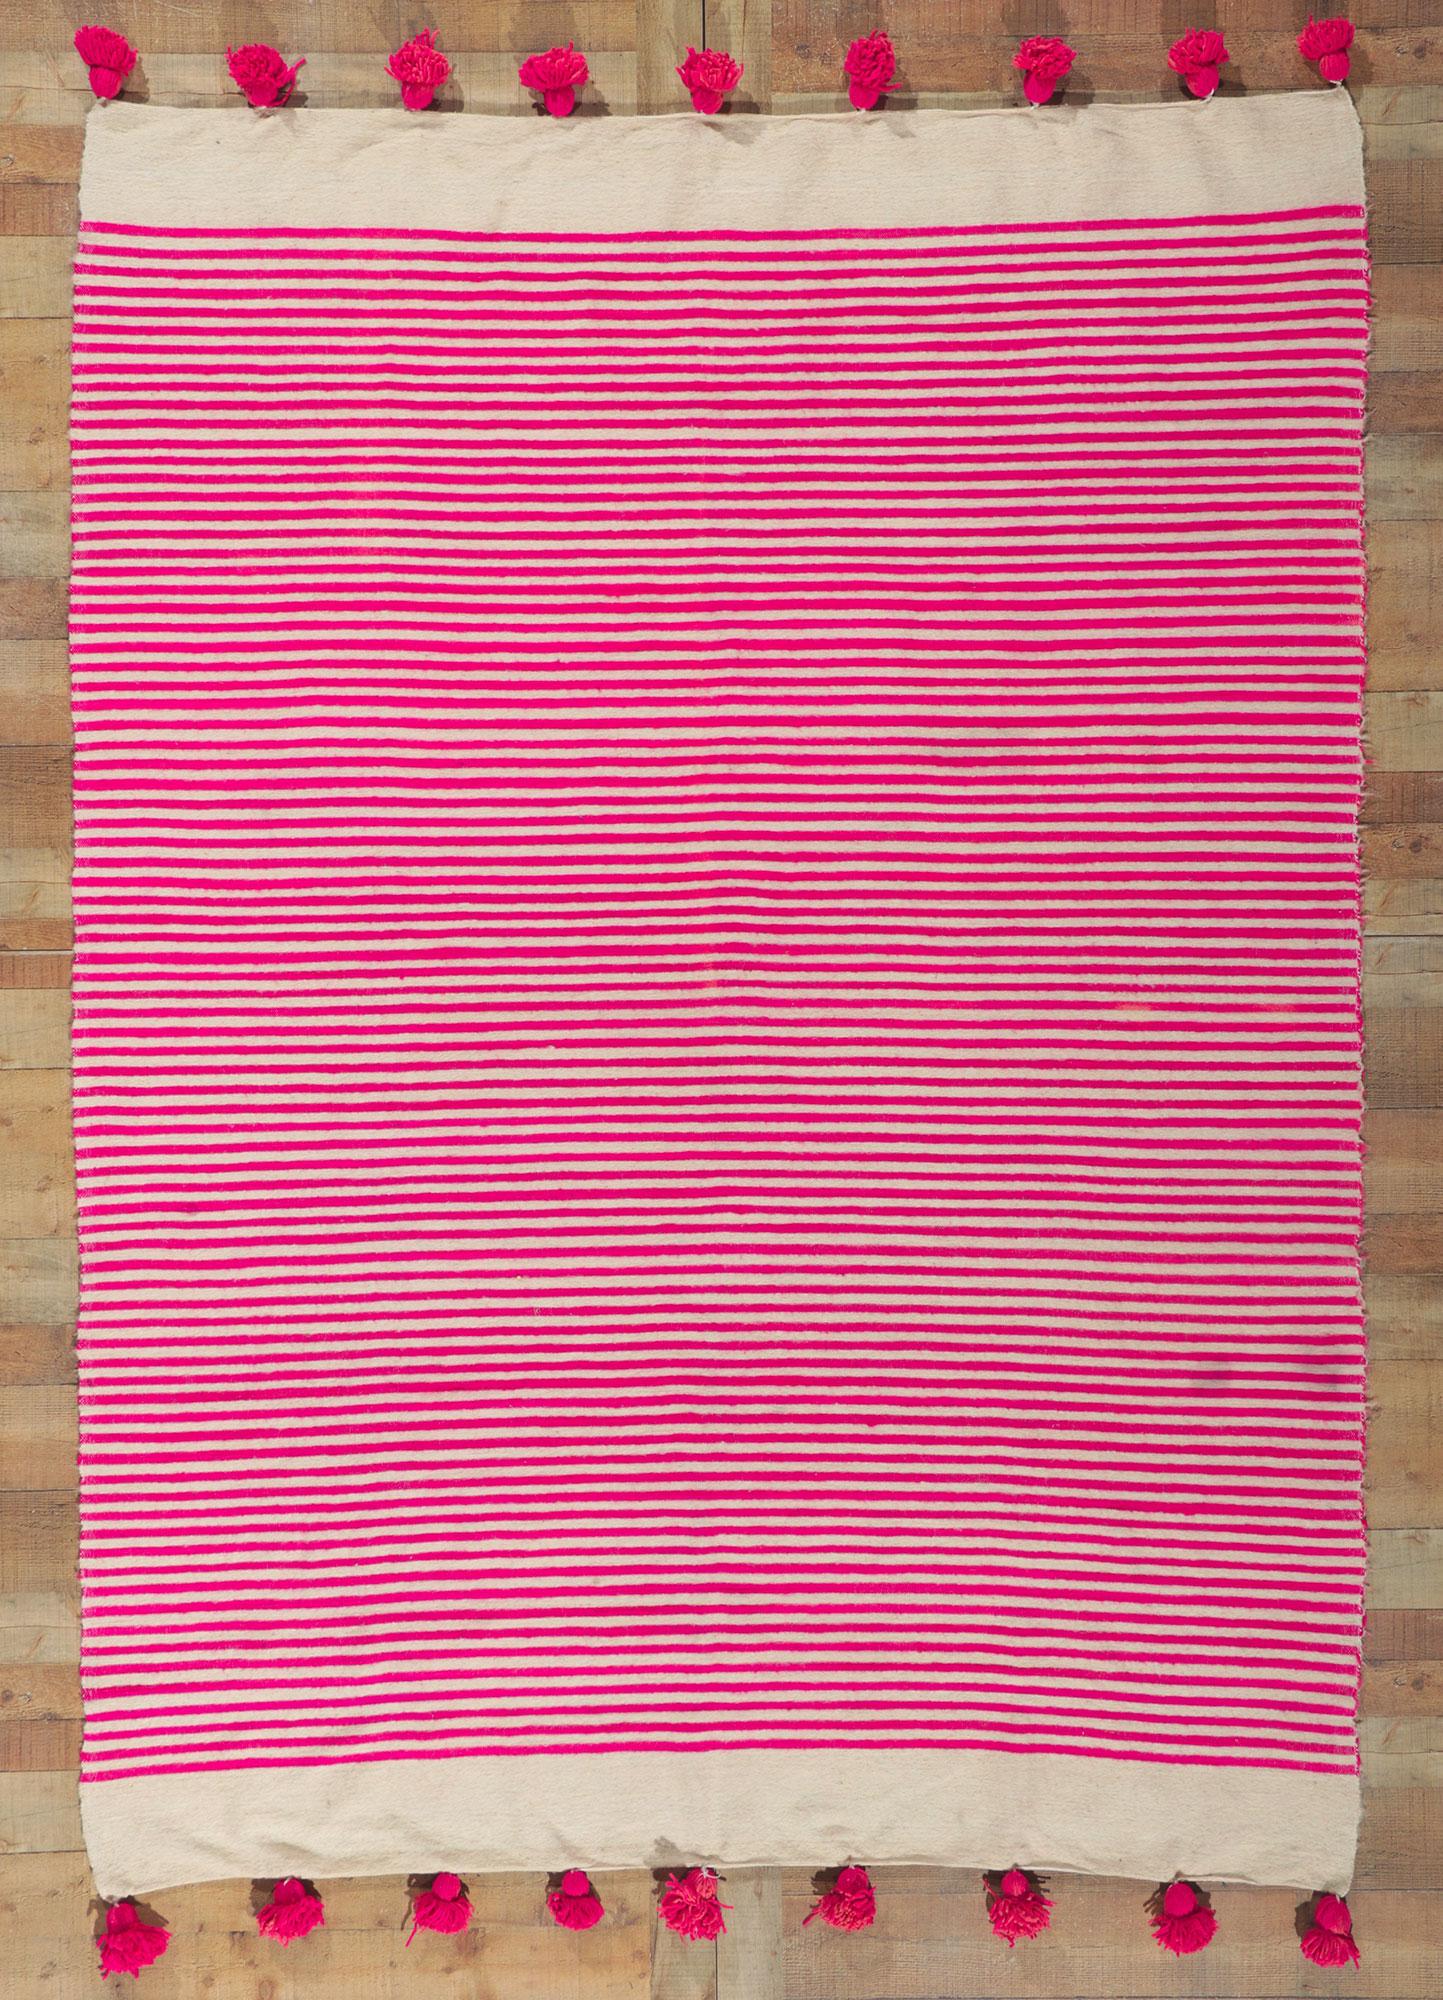 Vintage Berber Moroccan Kilim Rug with Hot Pink Stripes In Good Condition For Sale In Dallas, TX